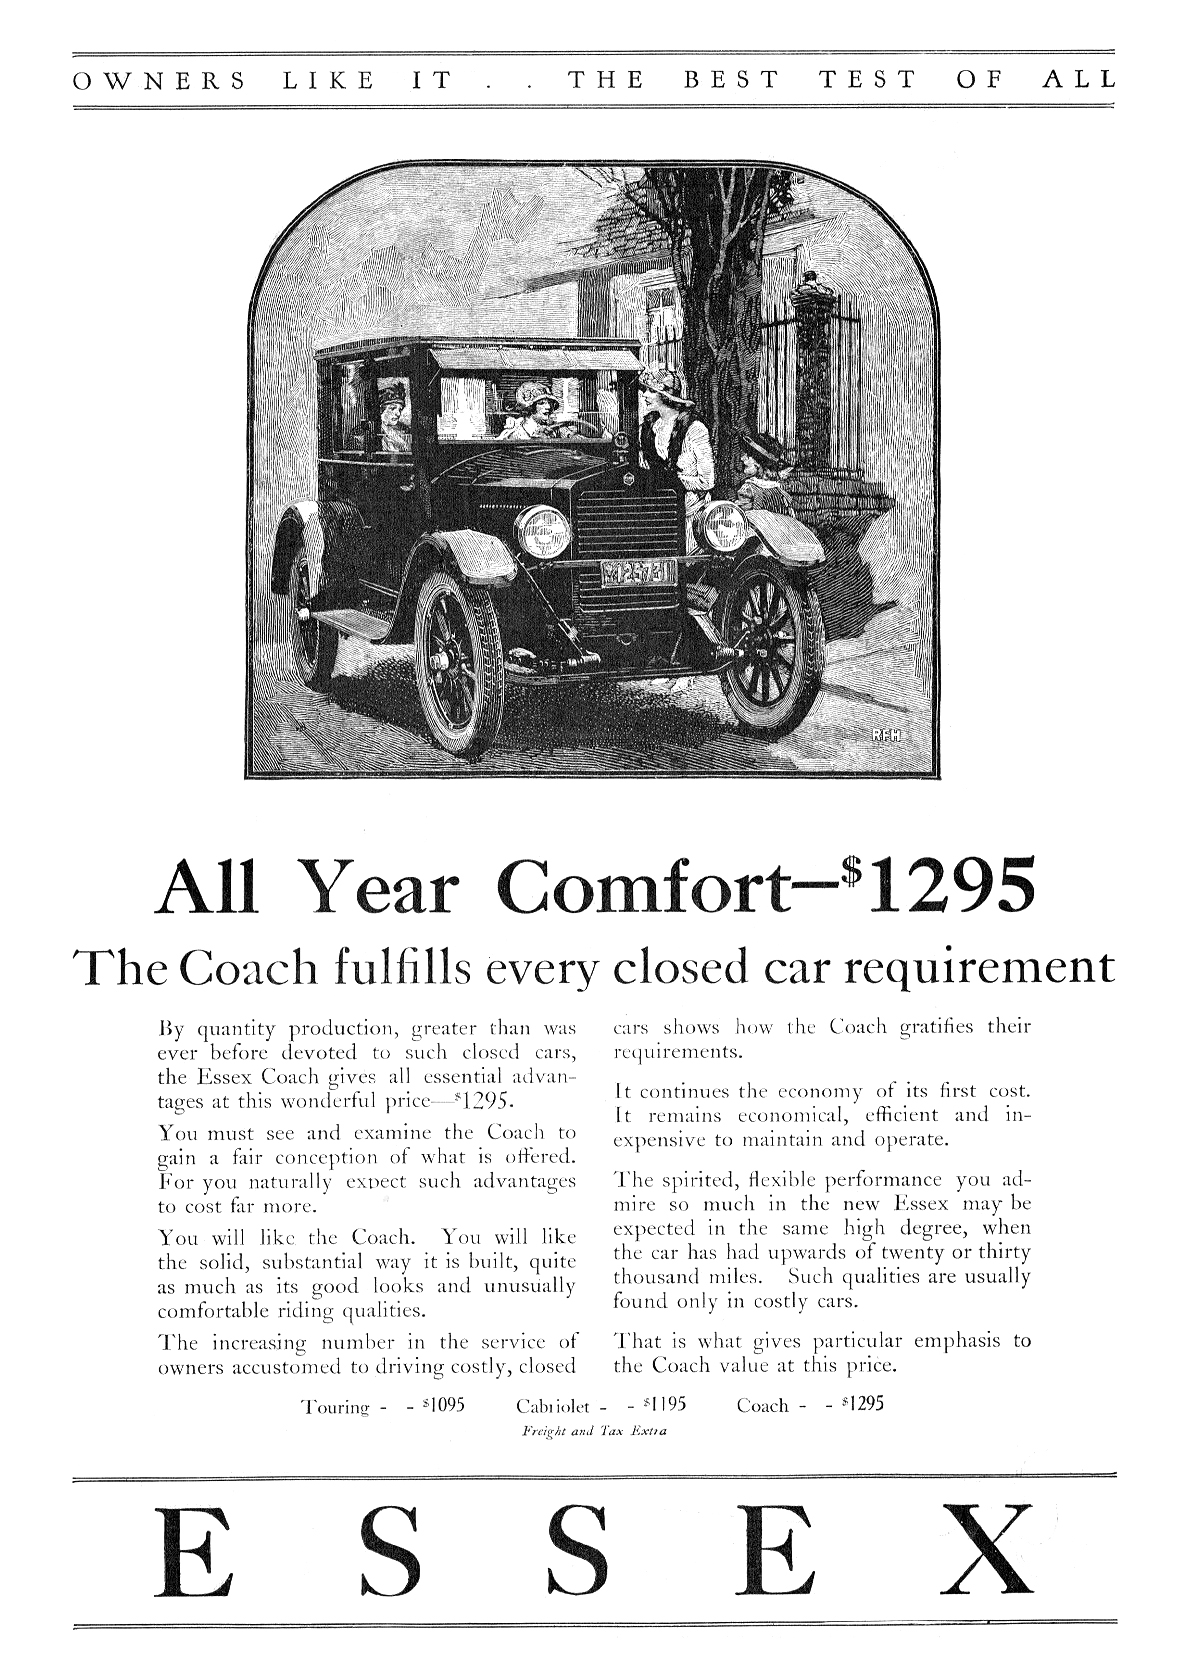 Essex Coach Ad (August, 1922) – Illustrated by Roy Frederic Heinrich – All Year Comfort